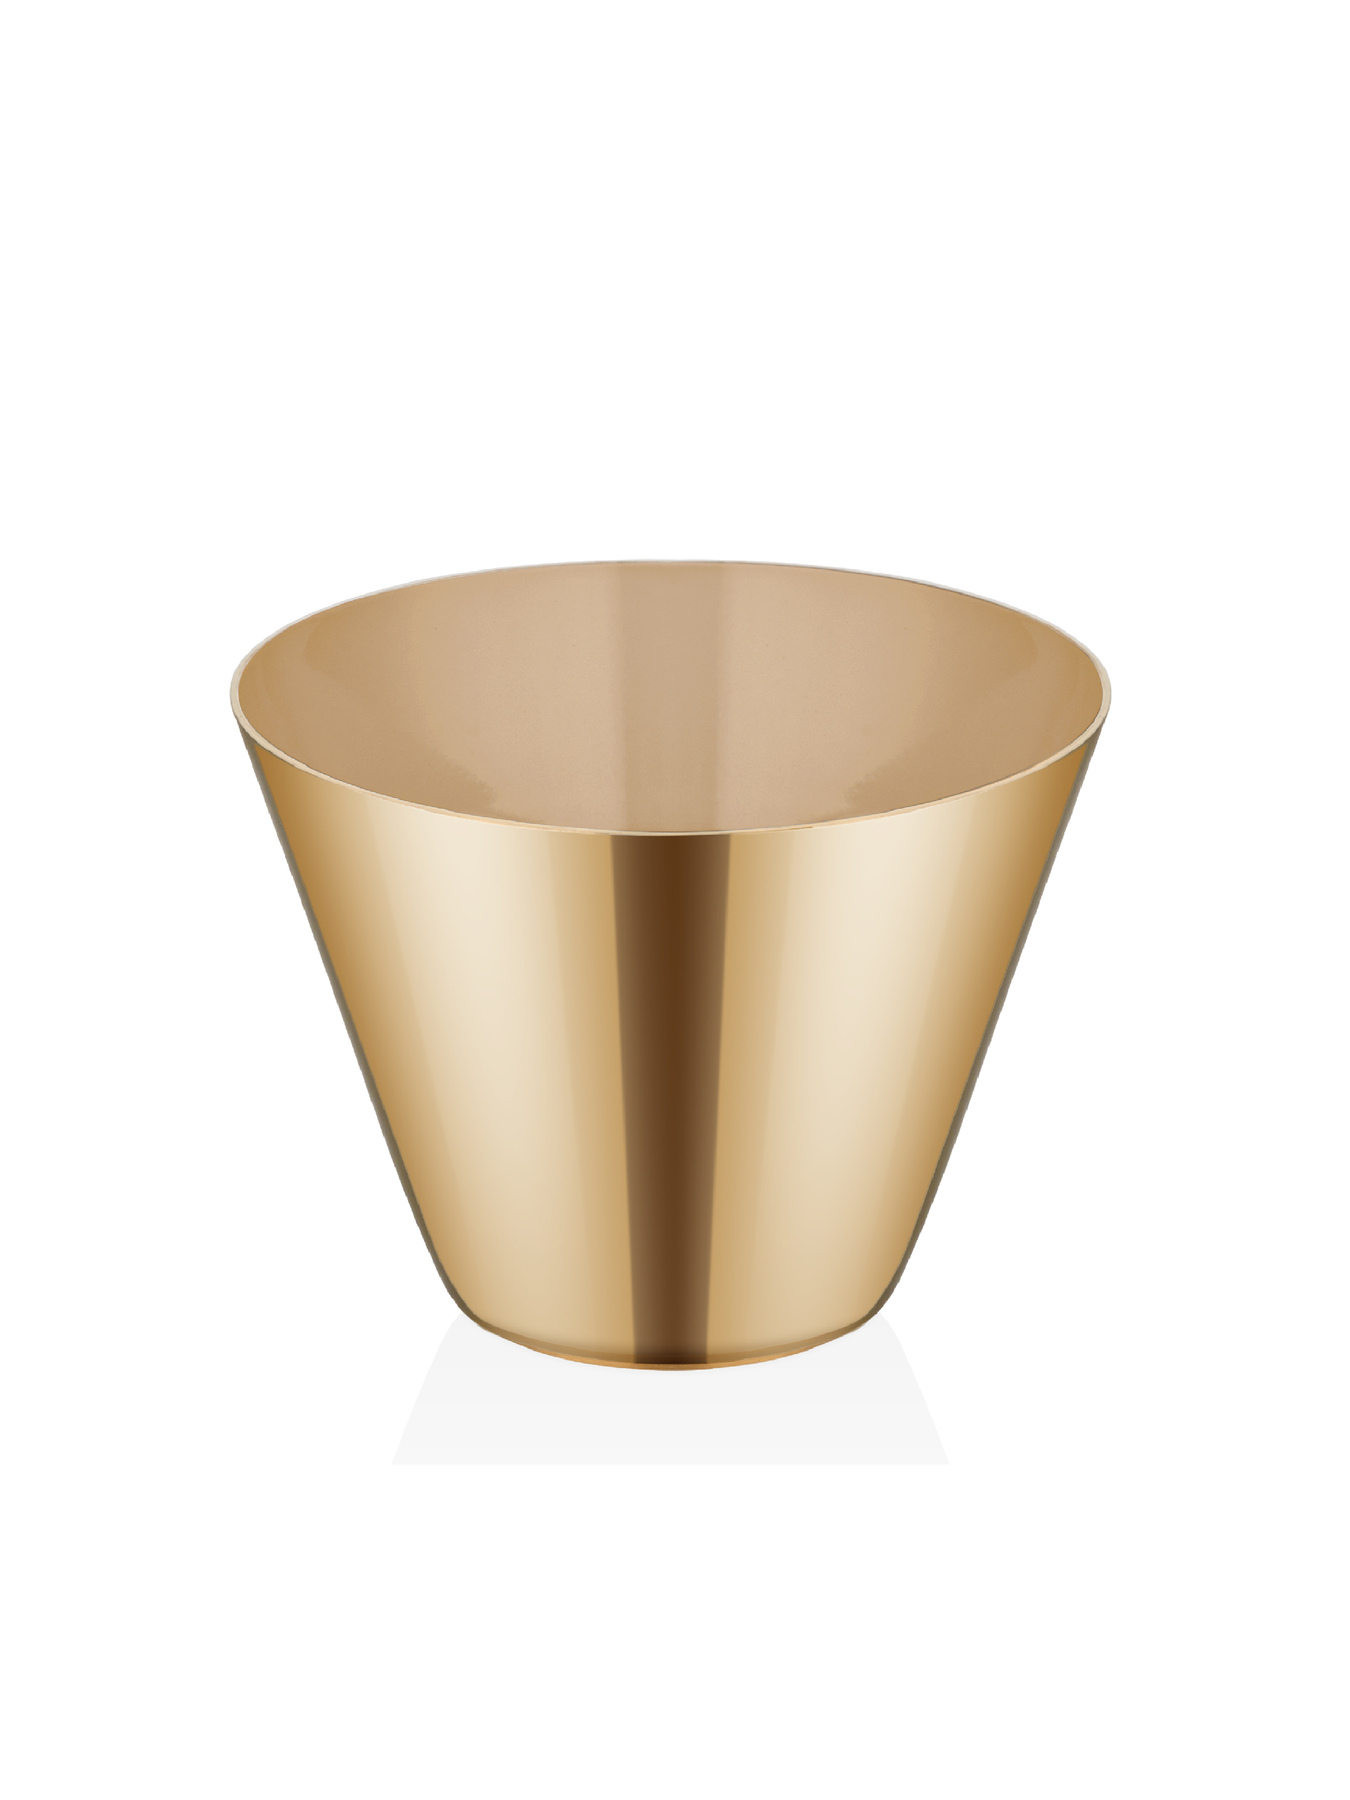 Conical - Nut Bowl - Gold & Beige